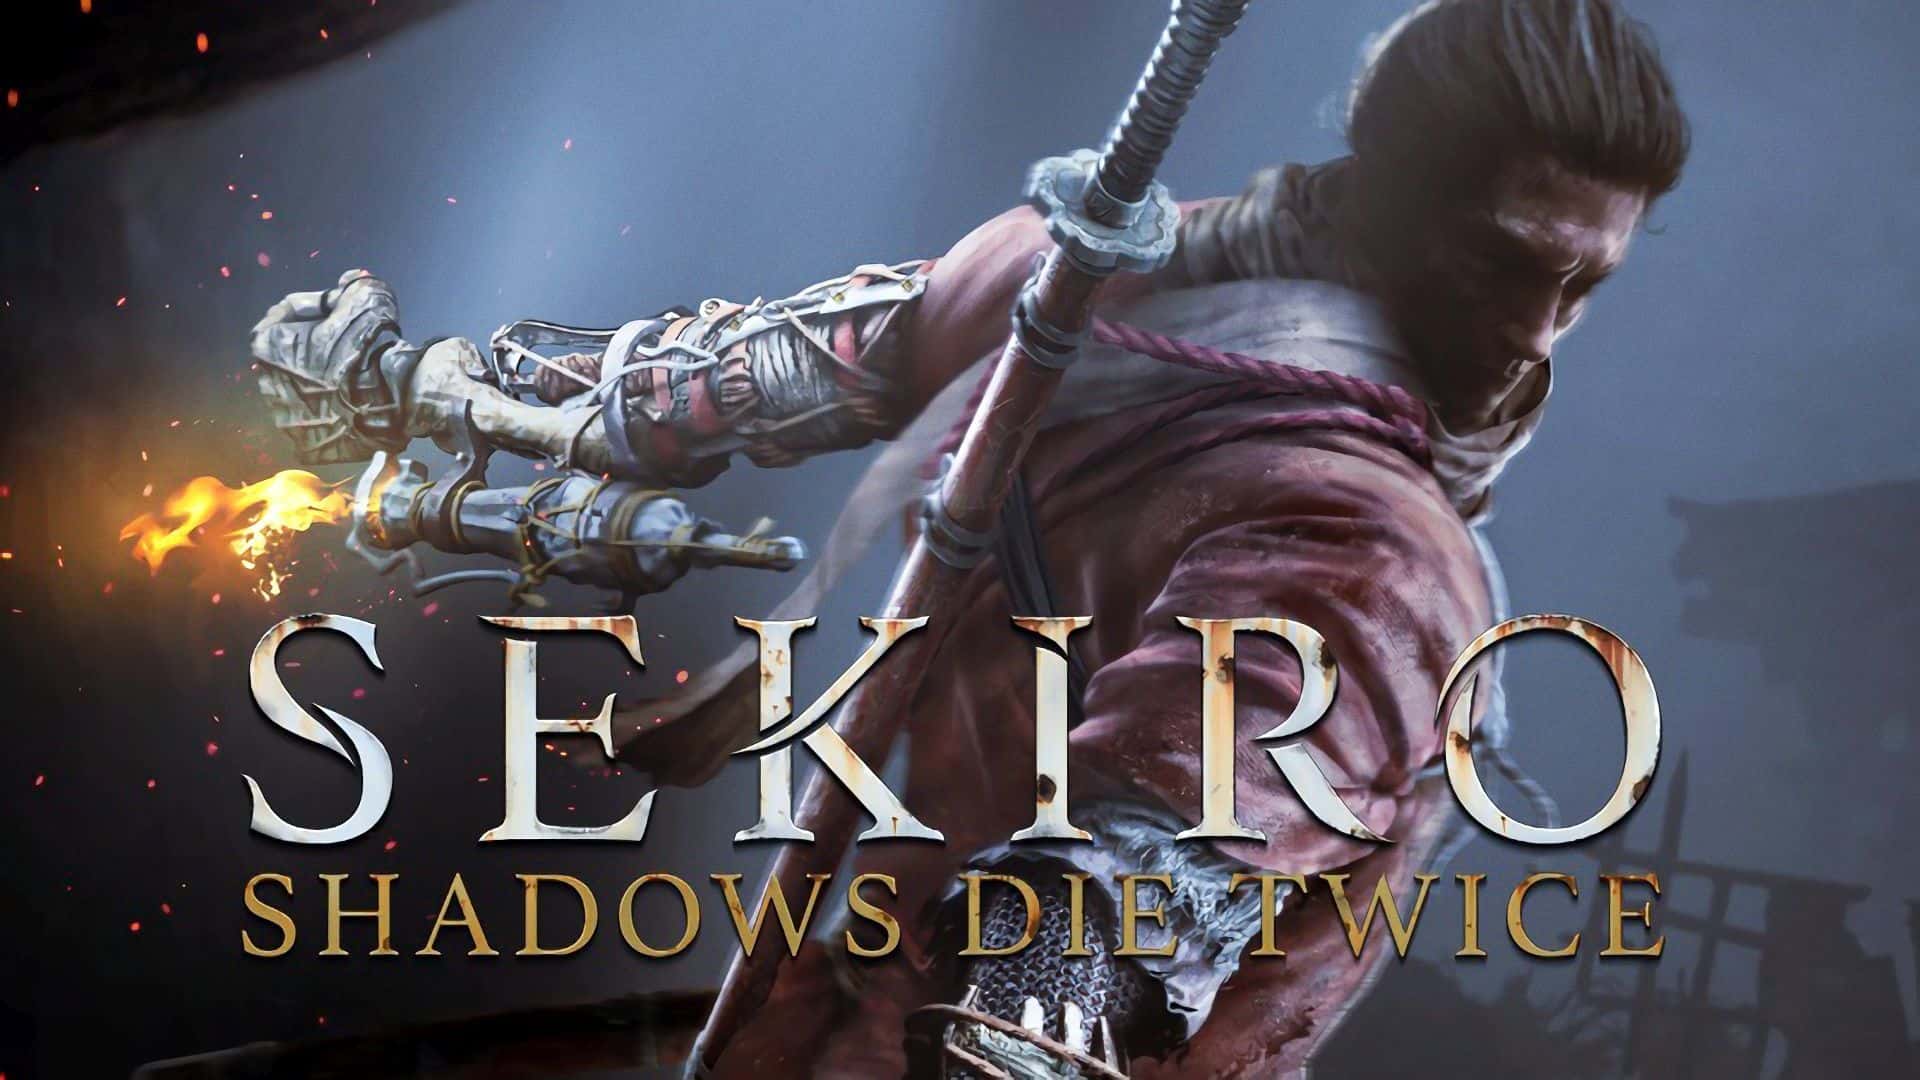 Sekiro: Shadows Die Twice Kills It With More Than 2 Million Copies Sold Worldwide In Less Than 10 Days